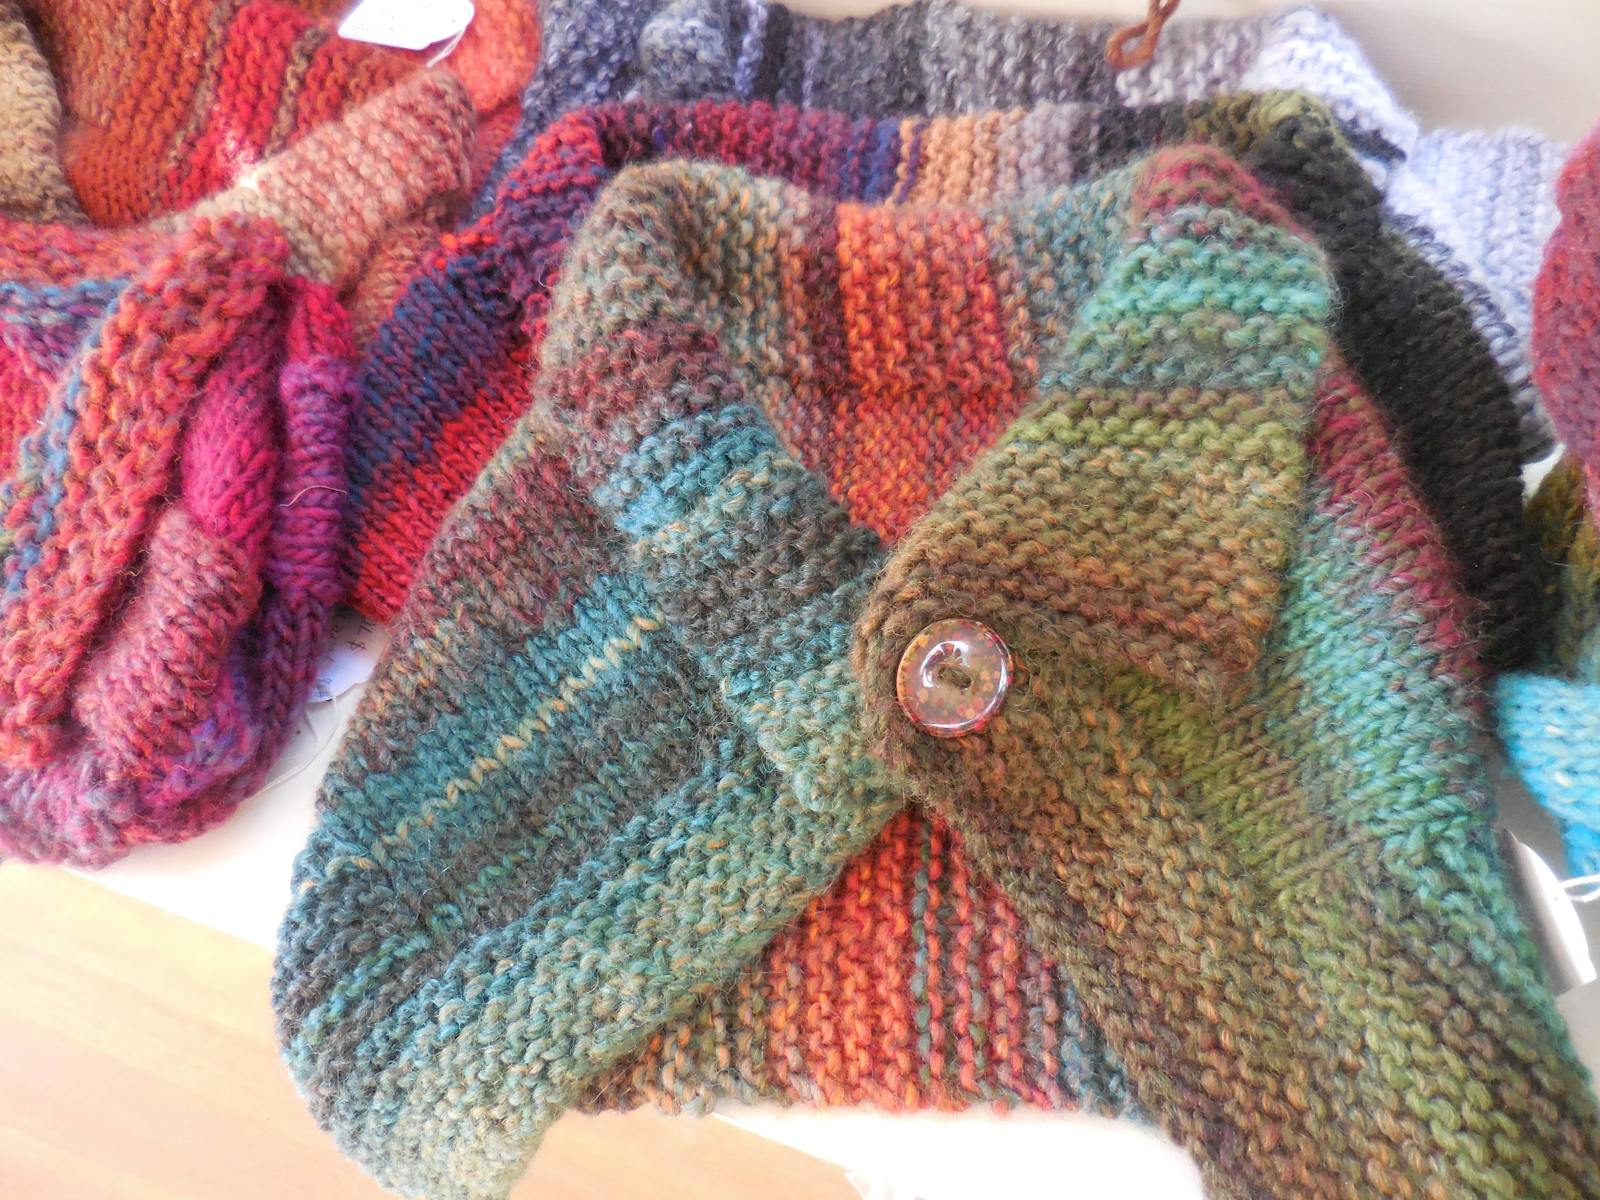 A rainbow coloured, hand-knitted neckwarmer with button